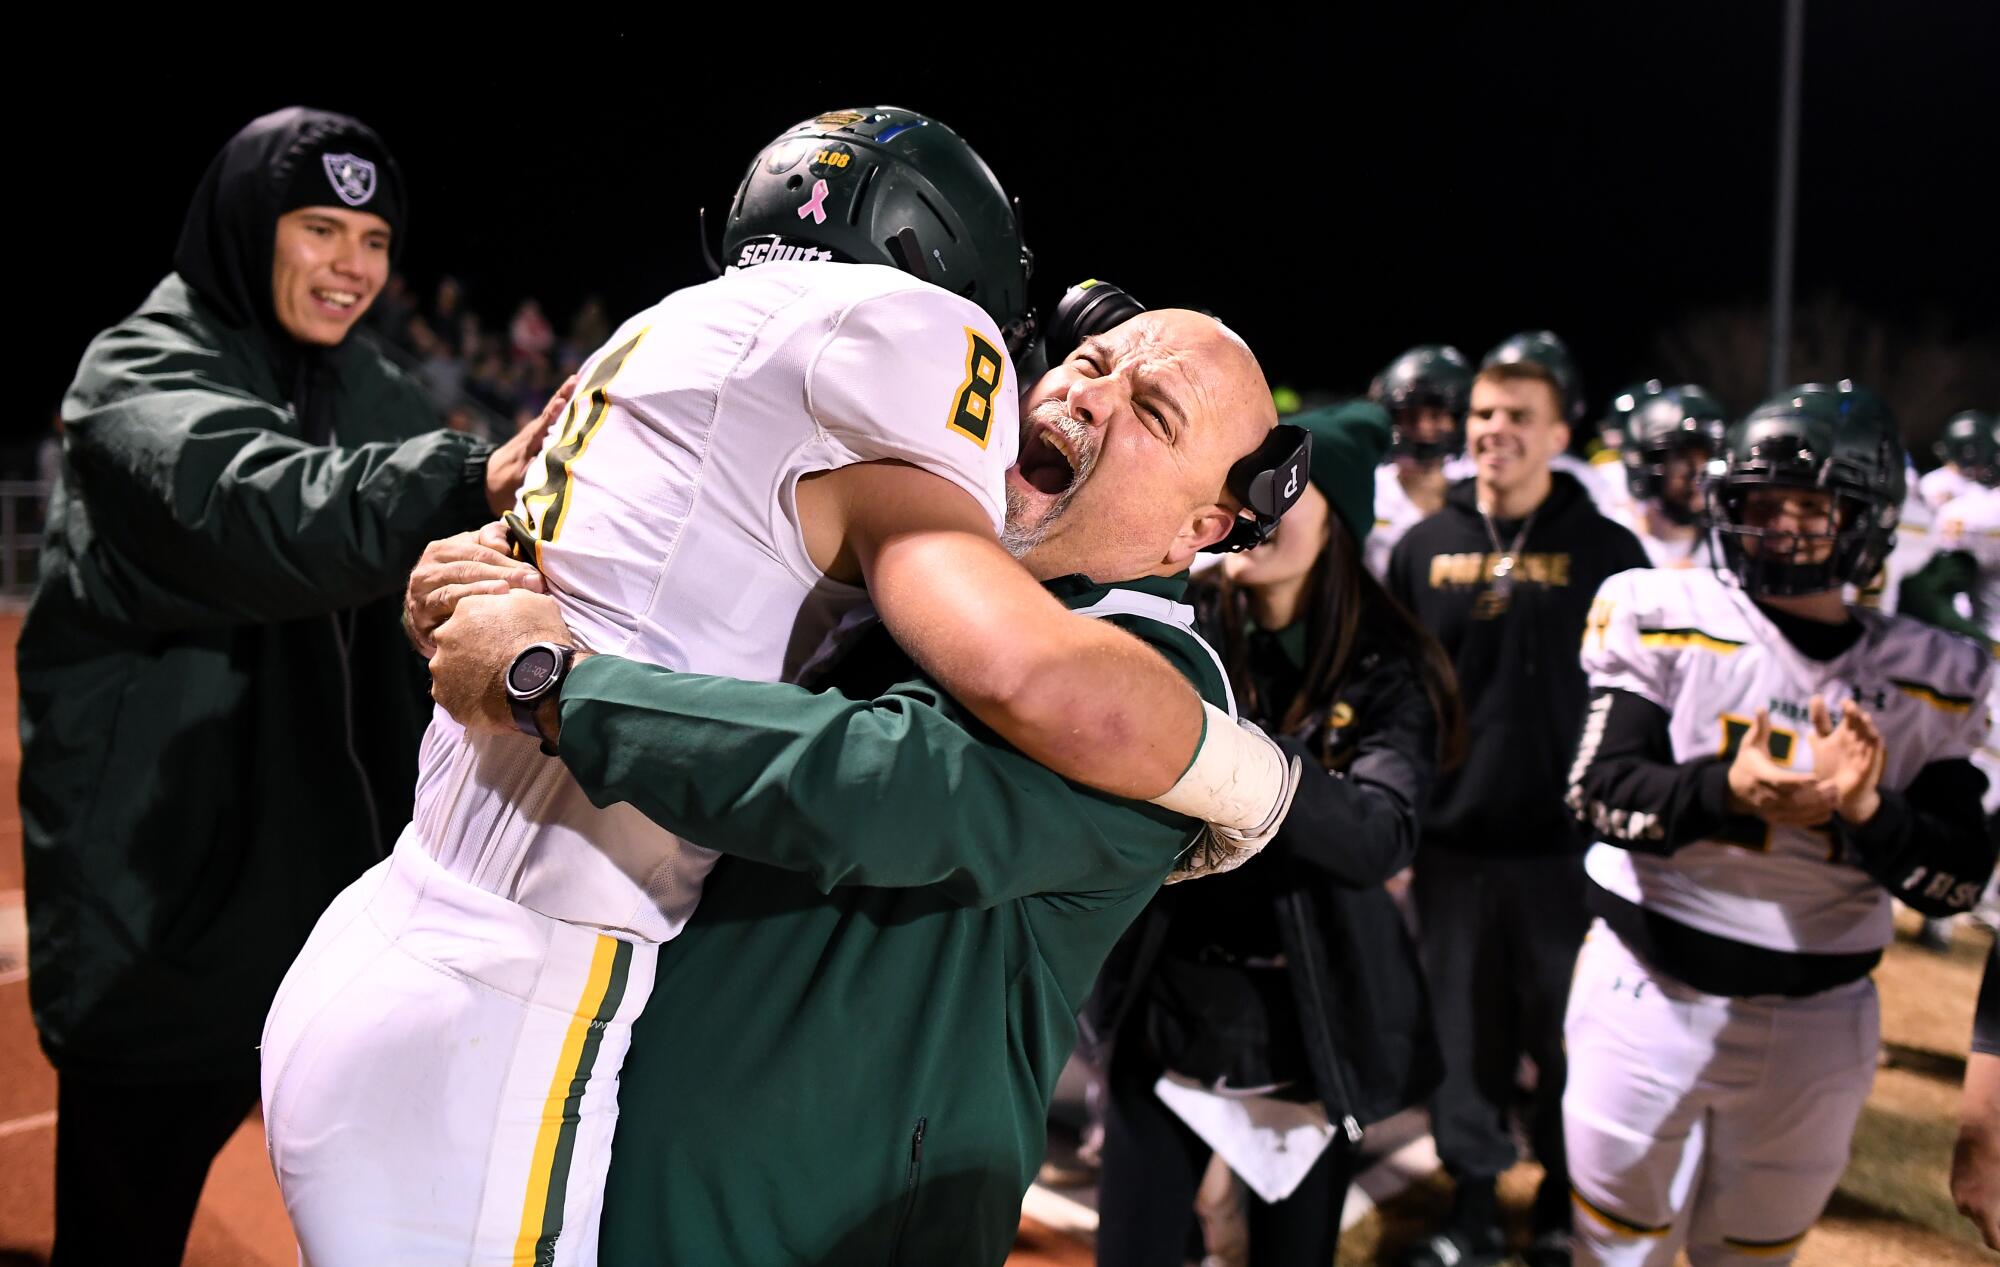 Brenden Moon is hugged on the sideline by assistant coach Nino Pinocchio after his touchdown.